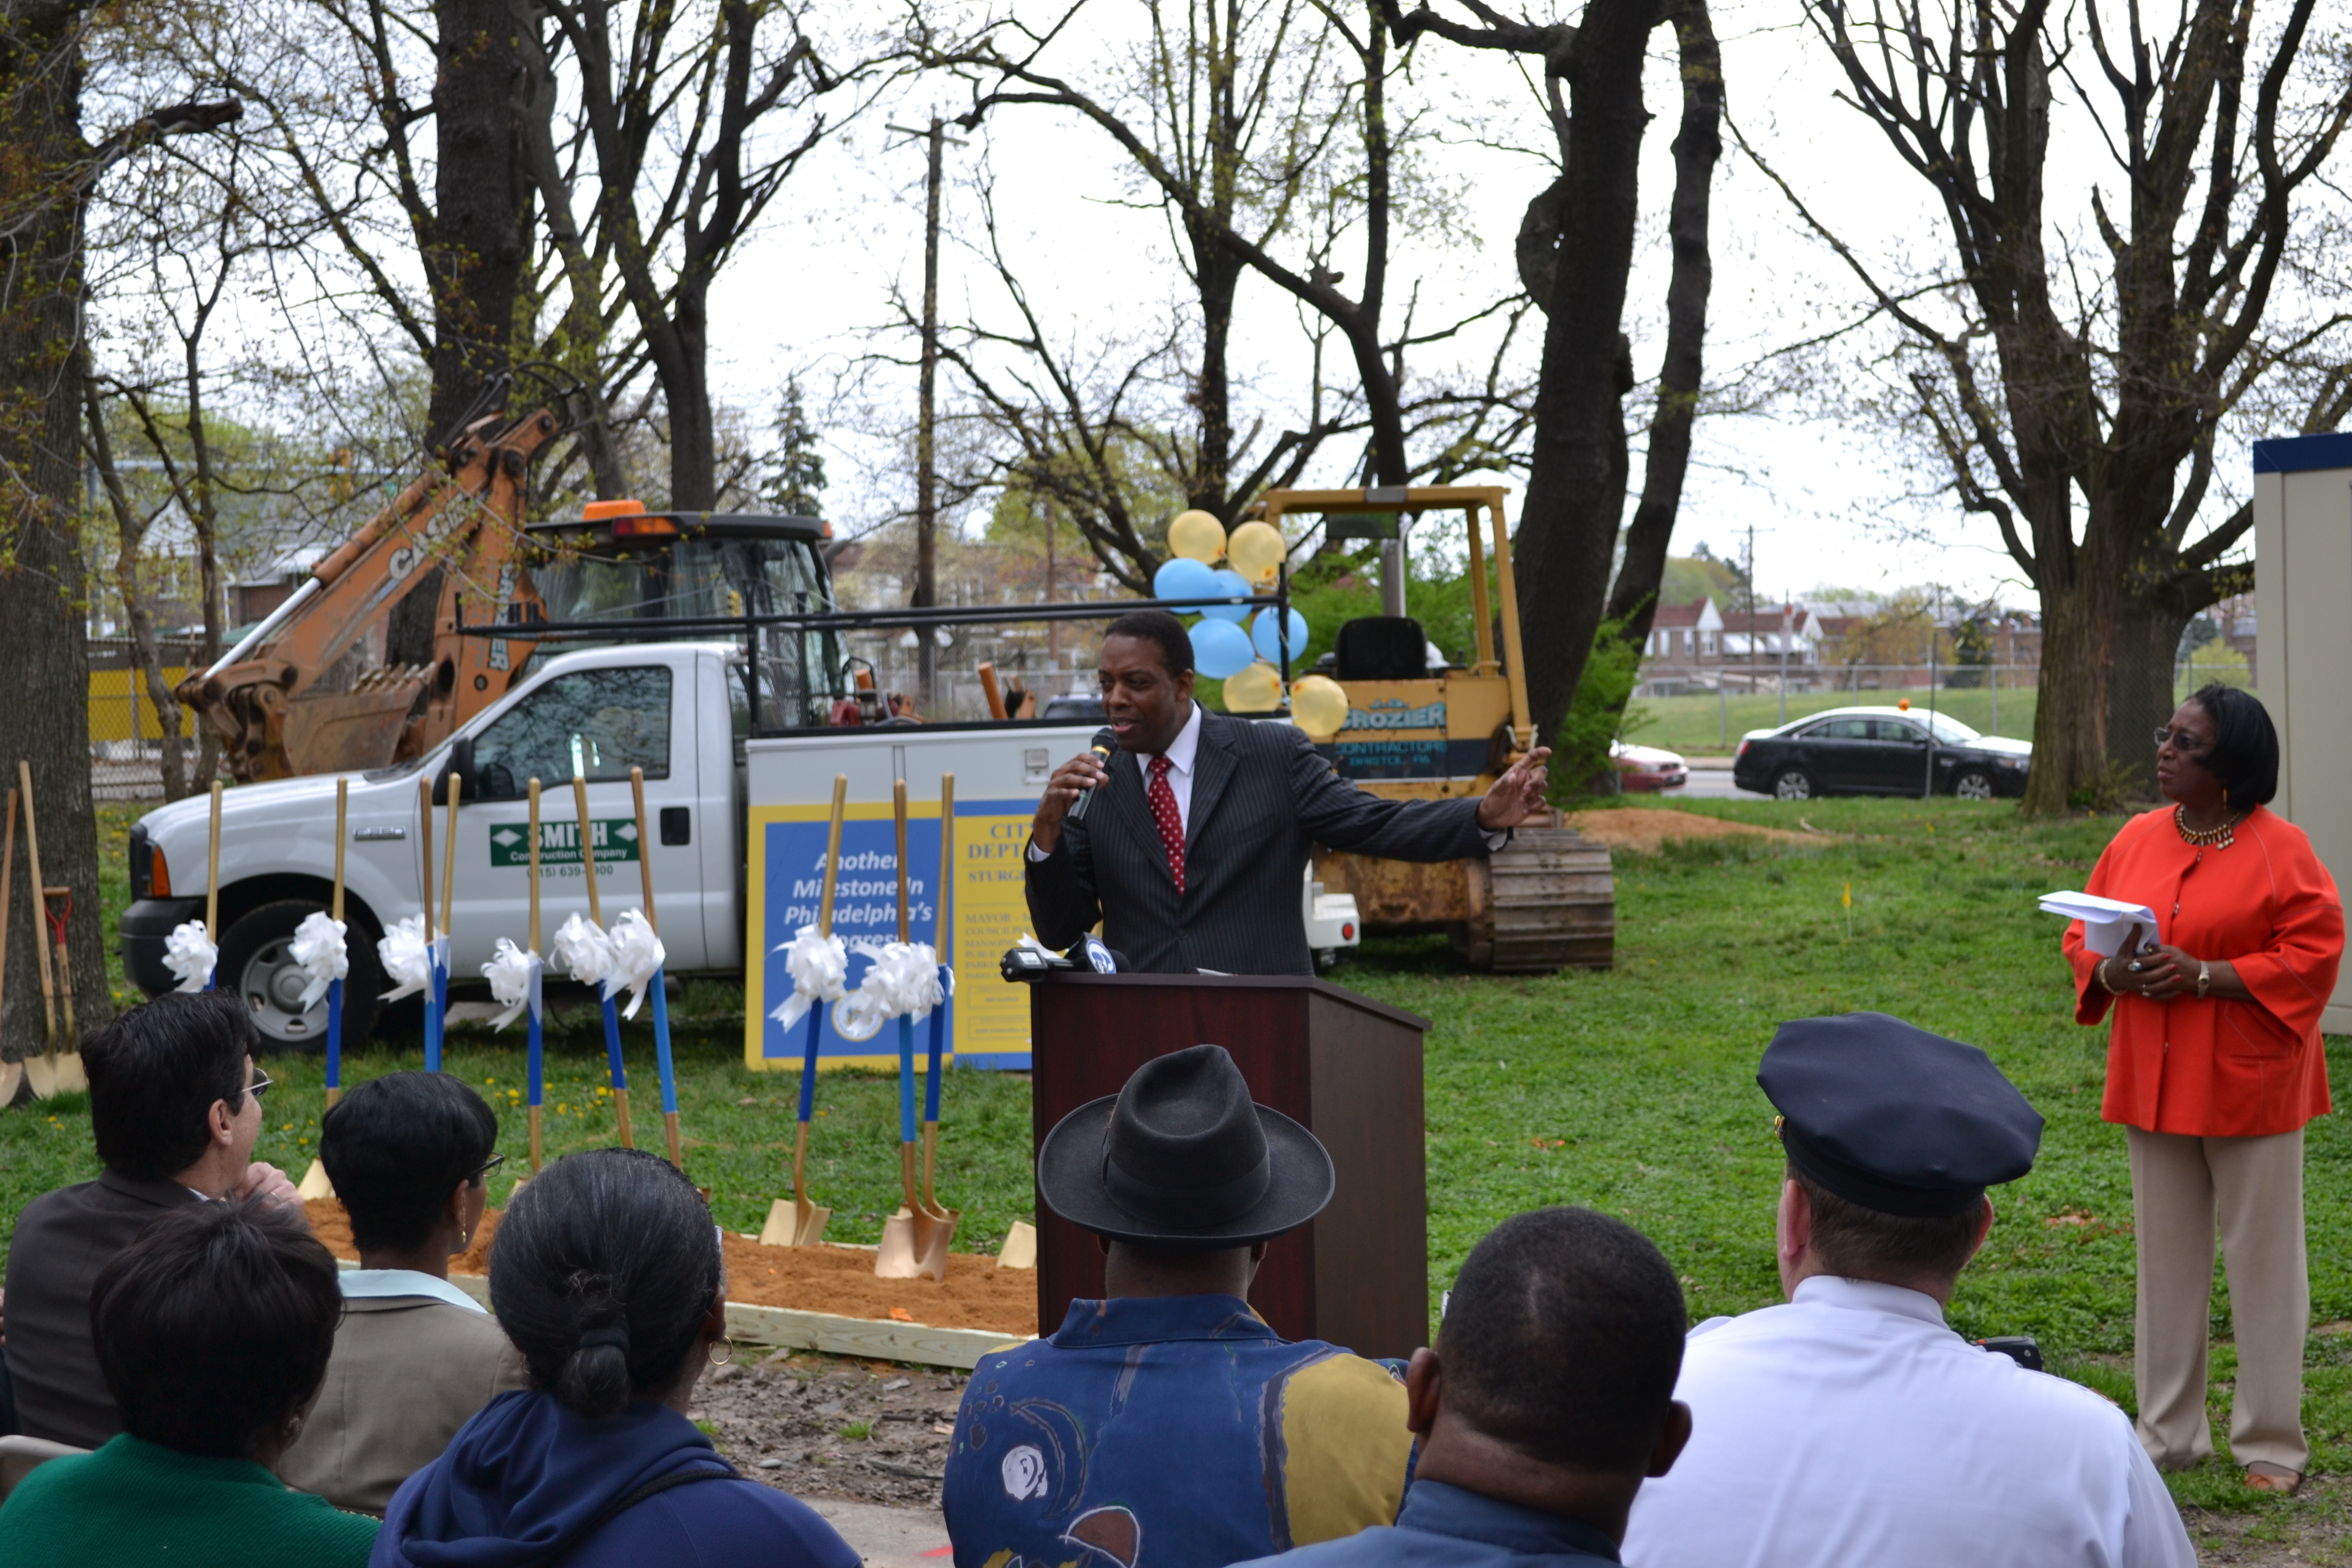 City Council President Darrell Clarke was one of many who praised Councilwoman Tasco for her commitment to the park and neighborhood